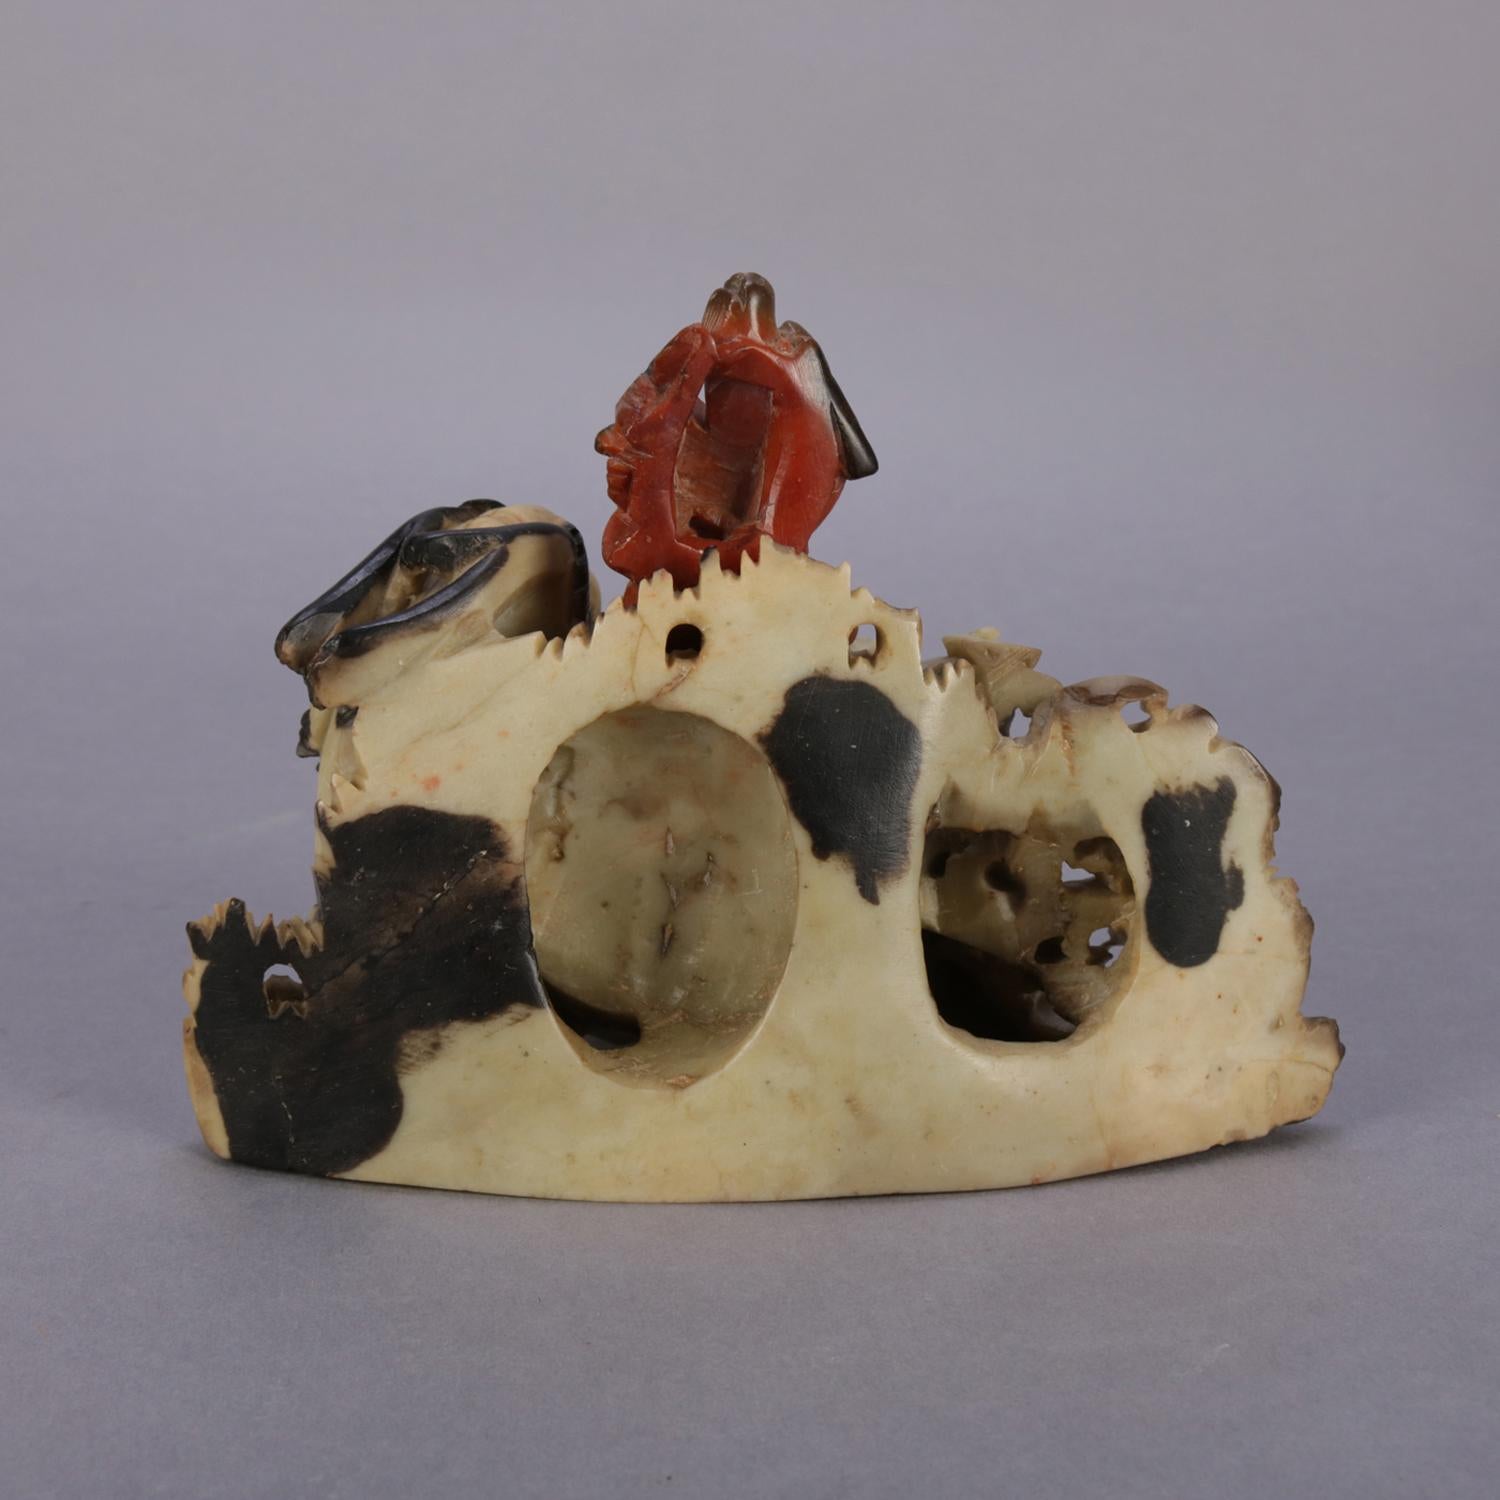 20th Century Chinese Figural Carved Soapstone Sculptural Inkwell, Sea Dragon & Koi circa 1900